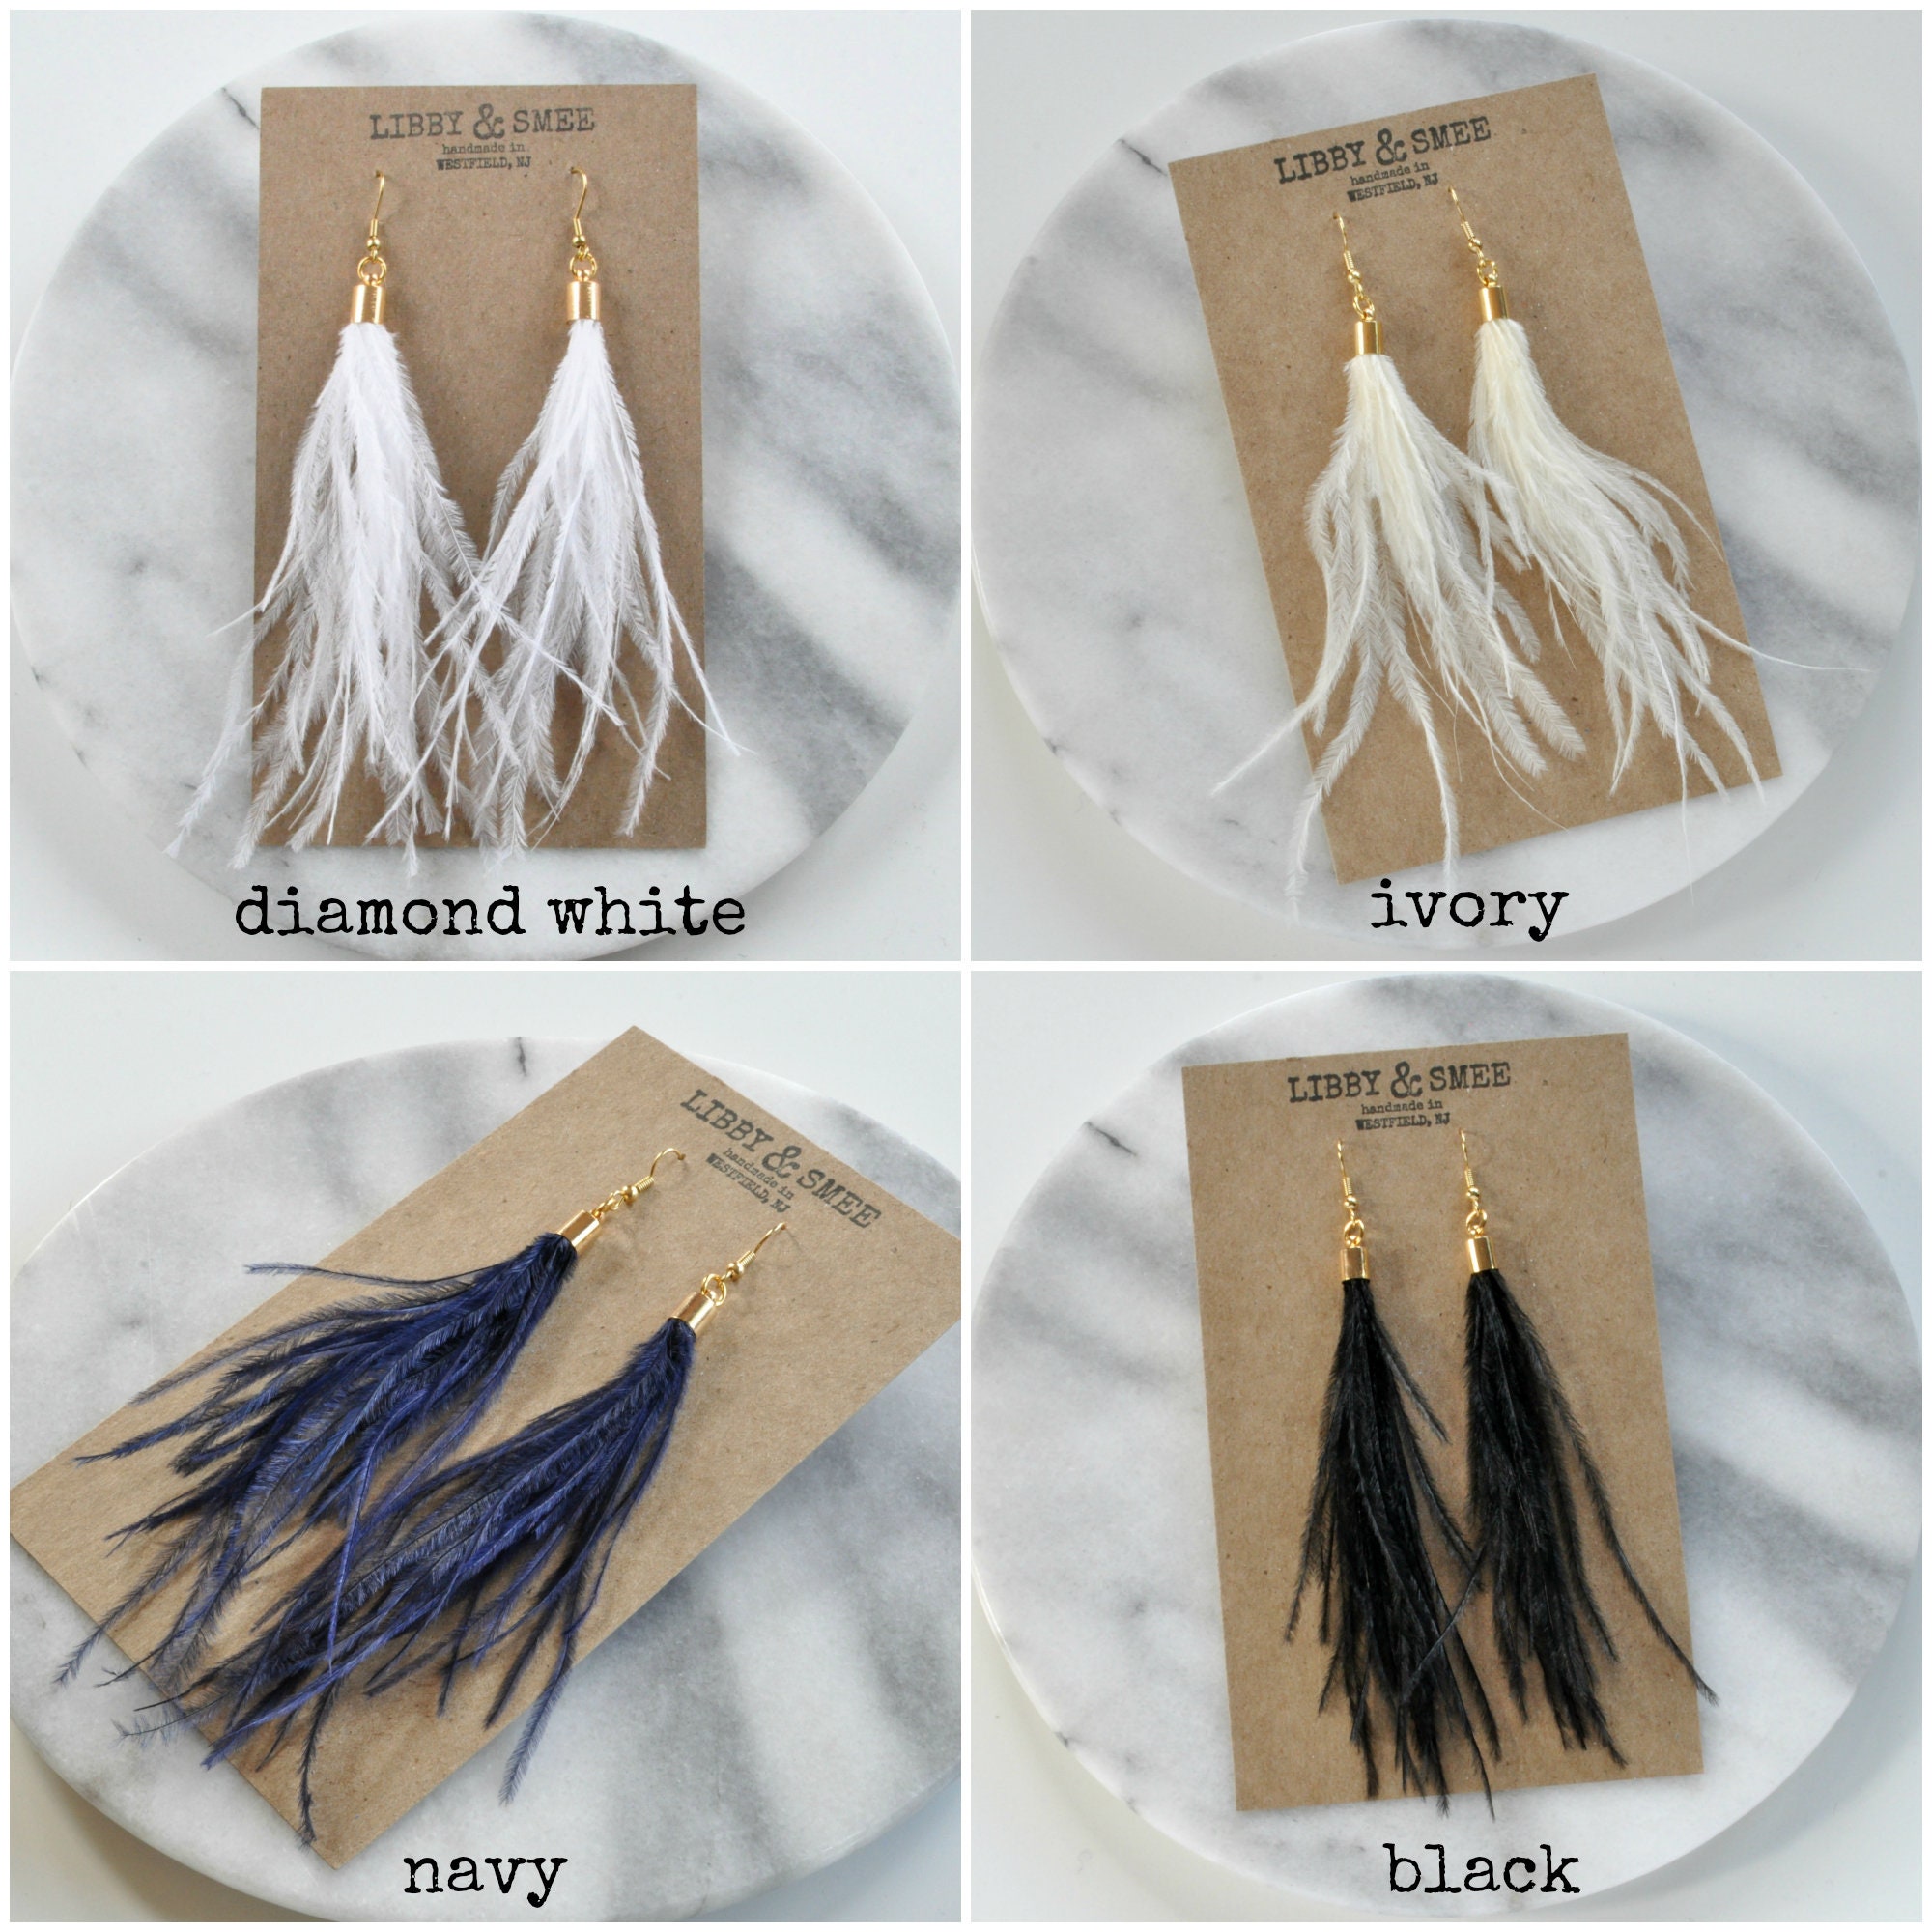 Homemade Ostrich Feather Earrings On Brushed Stock Photo 1621062850 |  Shutterstock